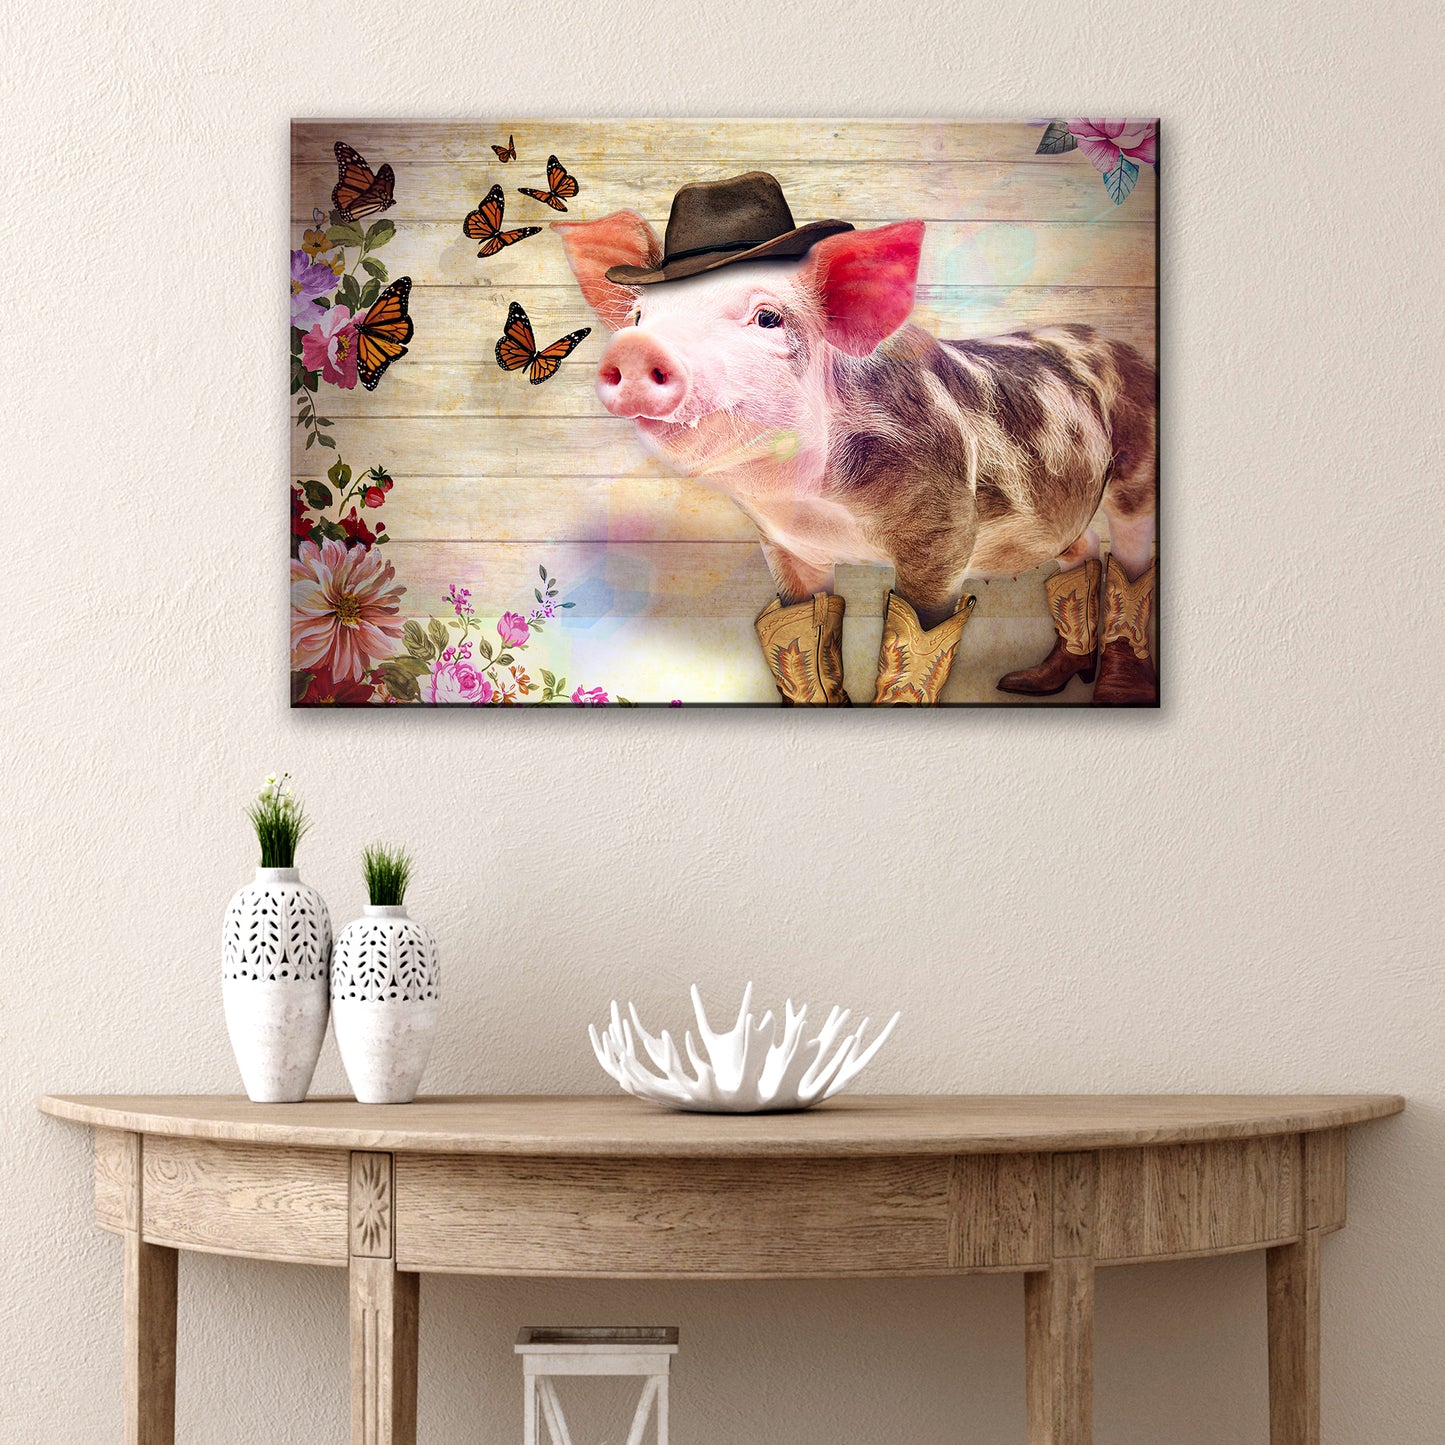 Cowboy Pig And Butterflies Canvas Wall Art Style 2 - Image by Tailored Canvases